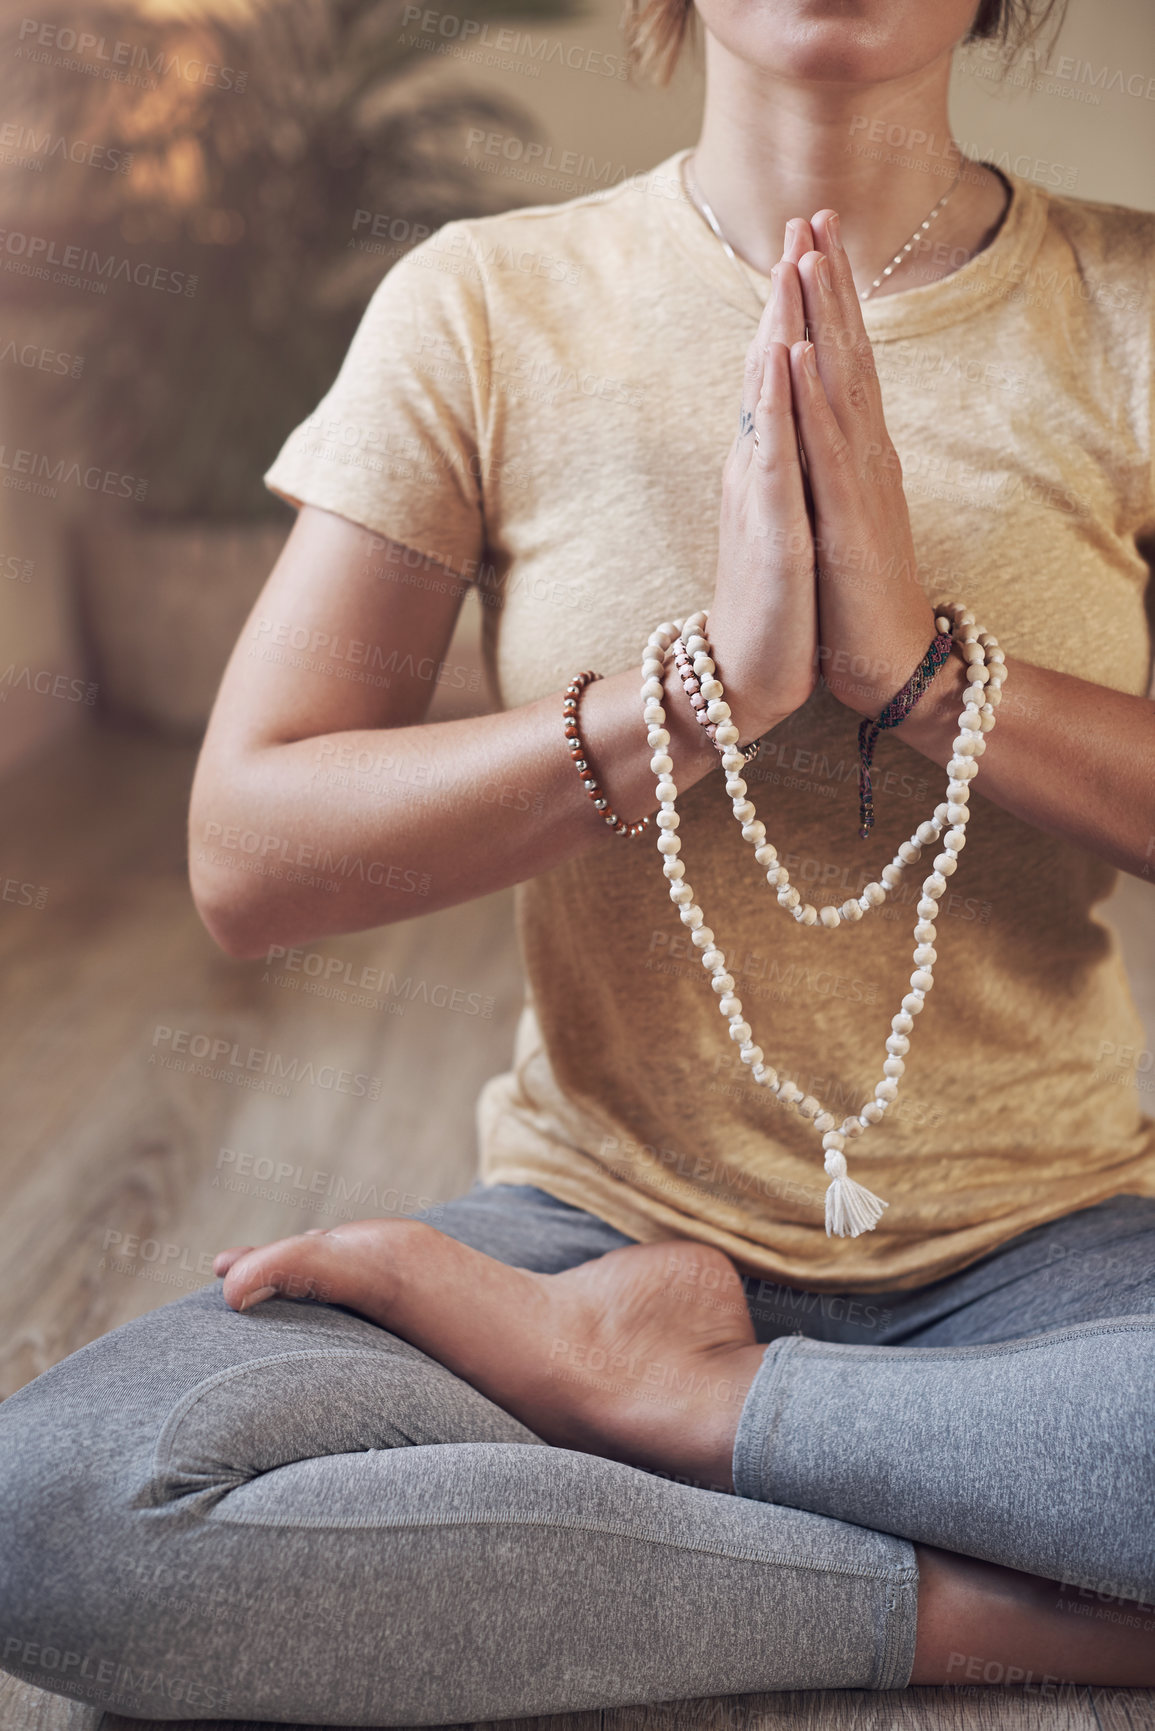 Buy stock photo Cropped shot of an unrecognizable woman sitting indoors and using mala beads during her meditation routine